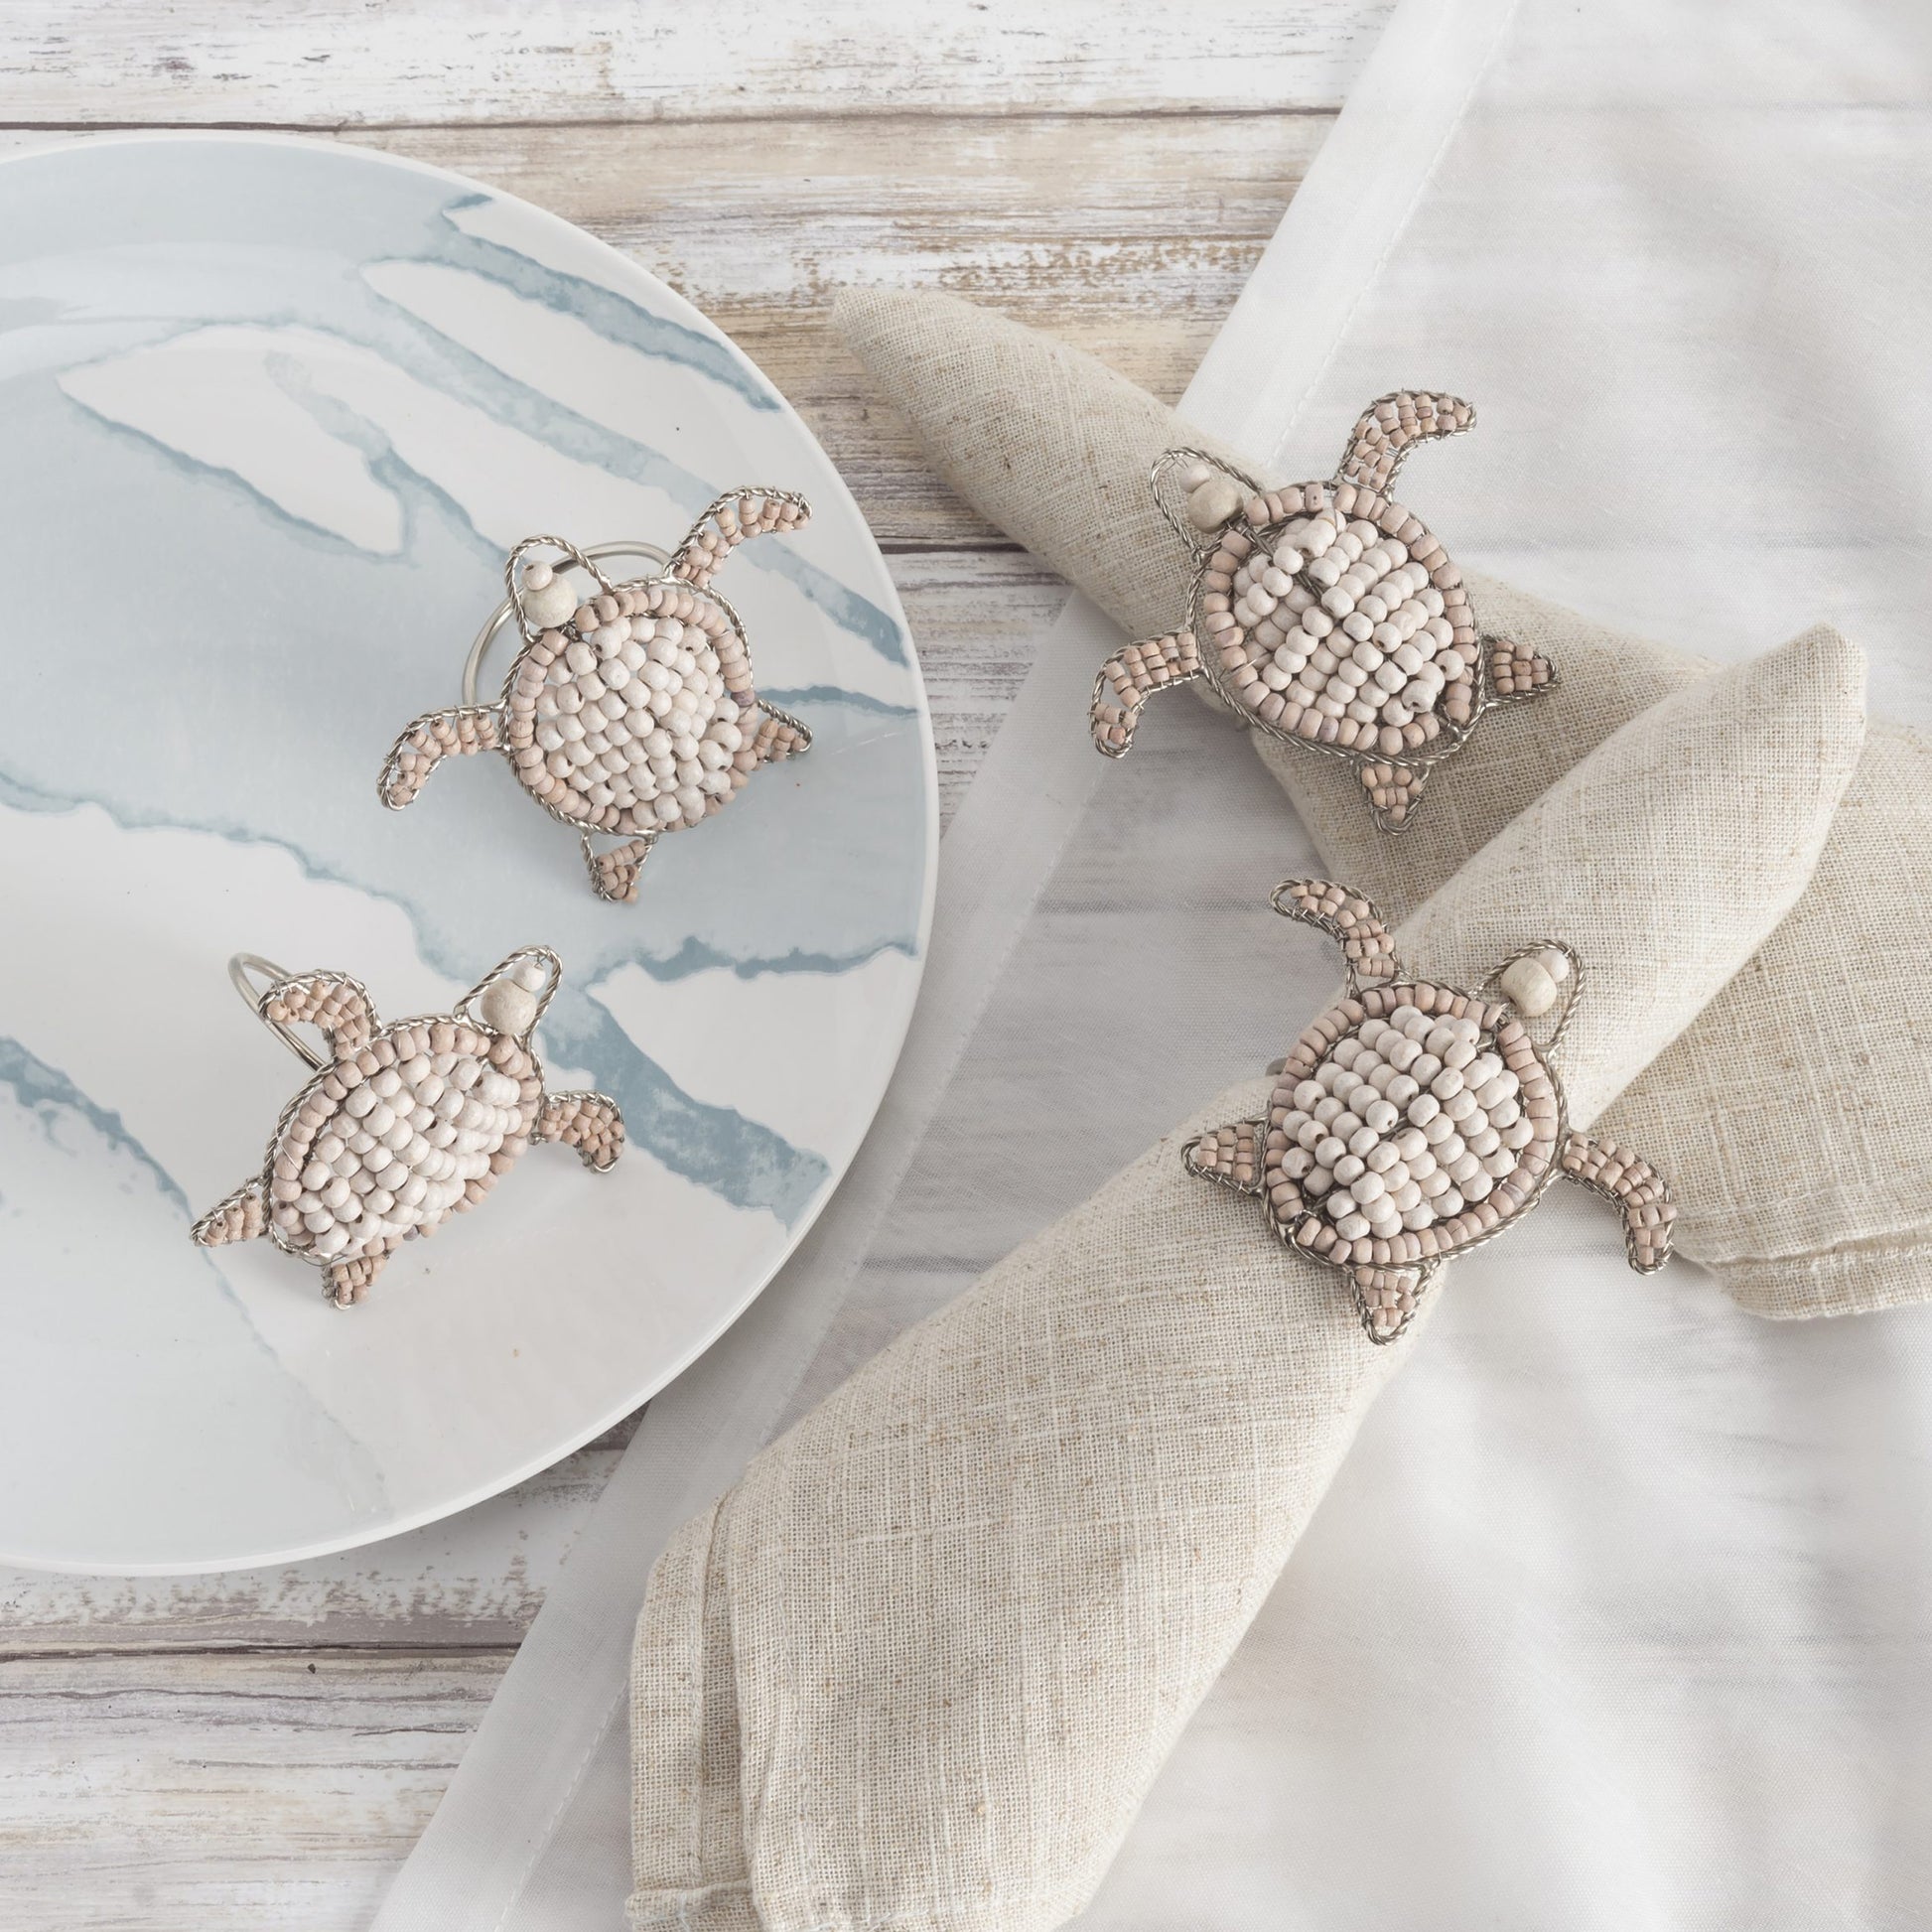 4 Sea Turtle shaped napkin rings crafted of natural beads. 